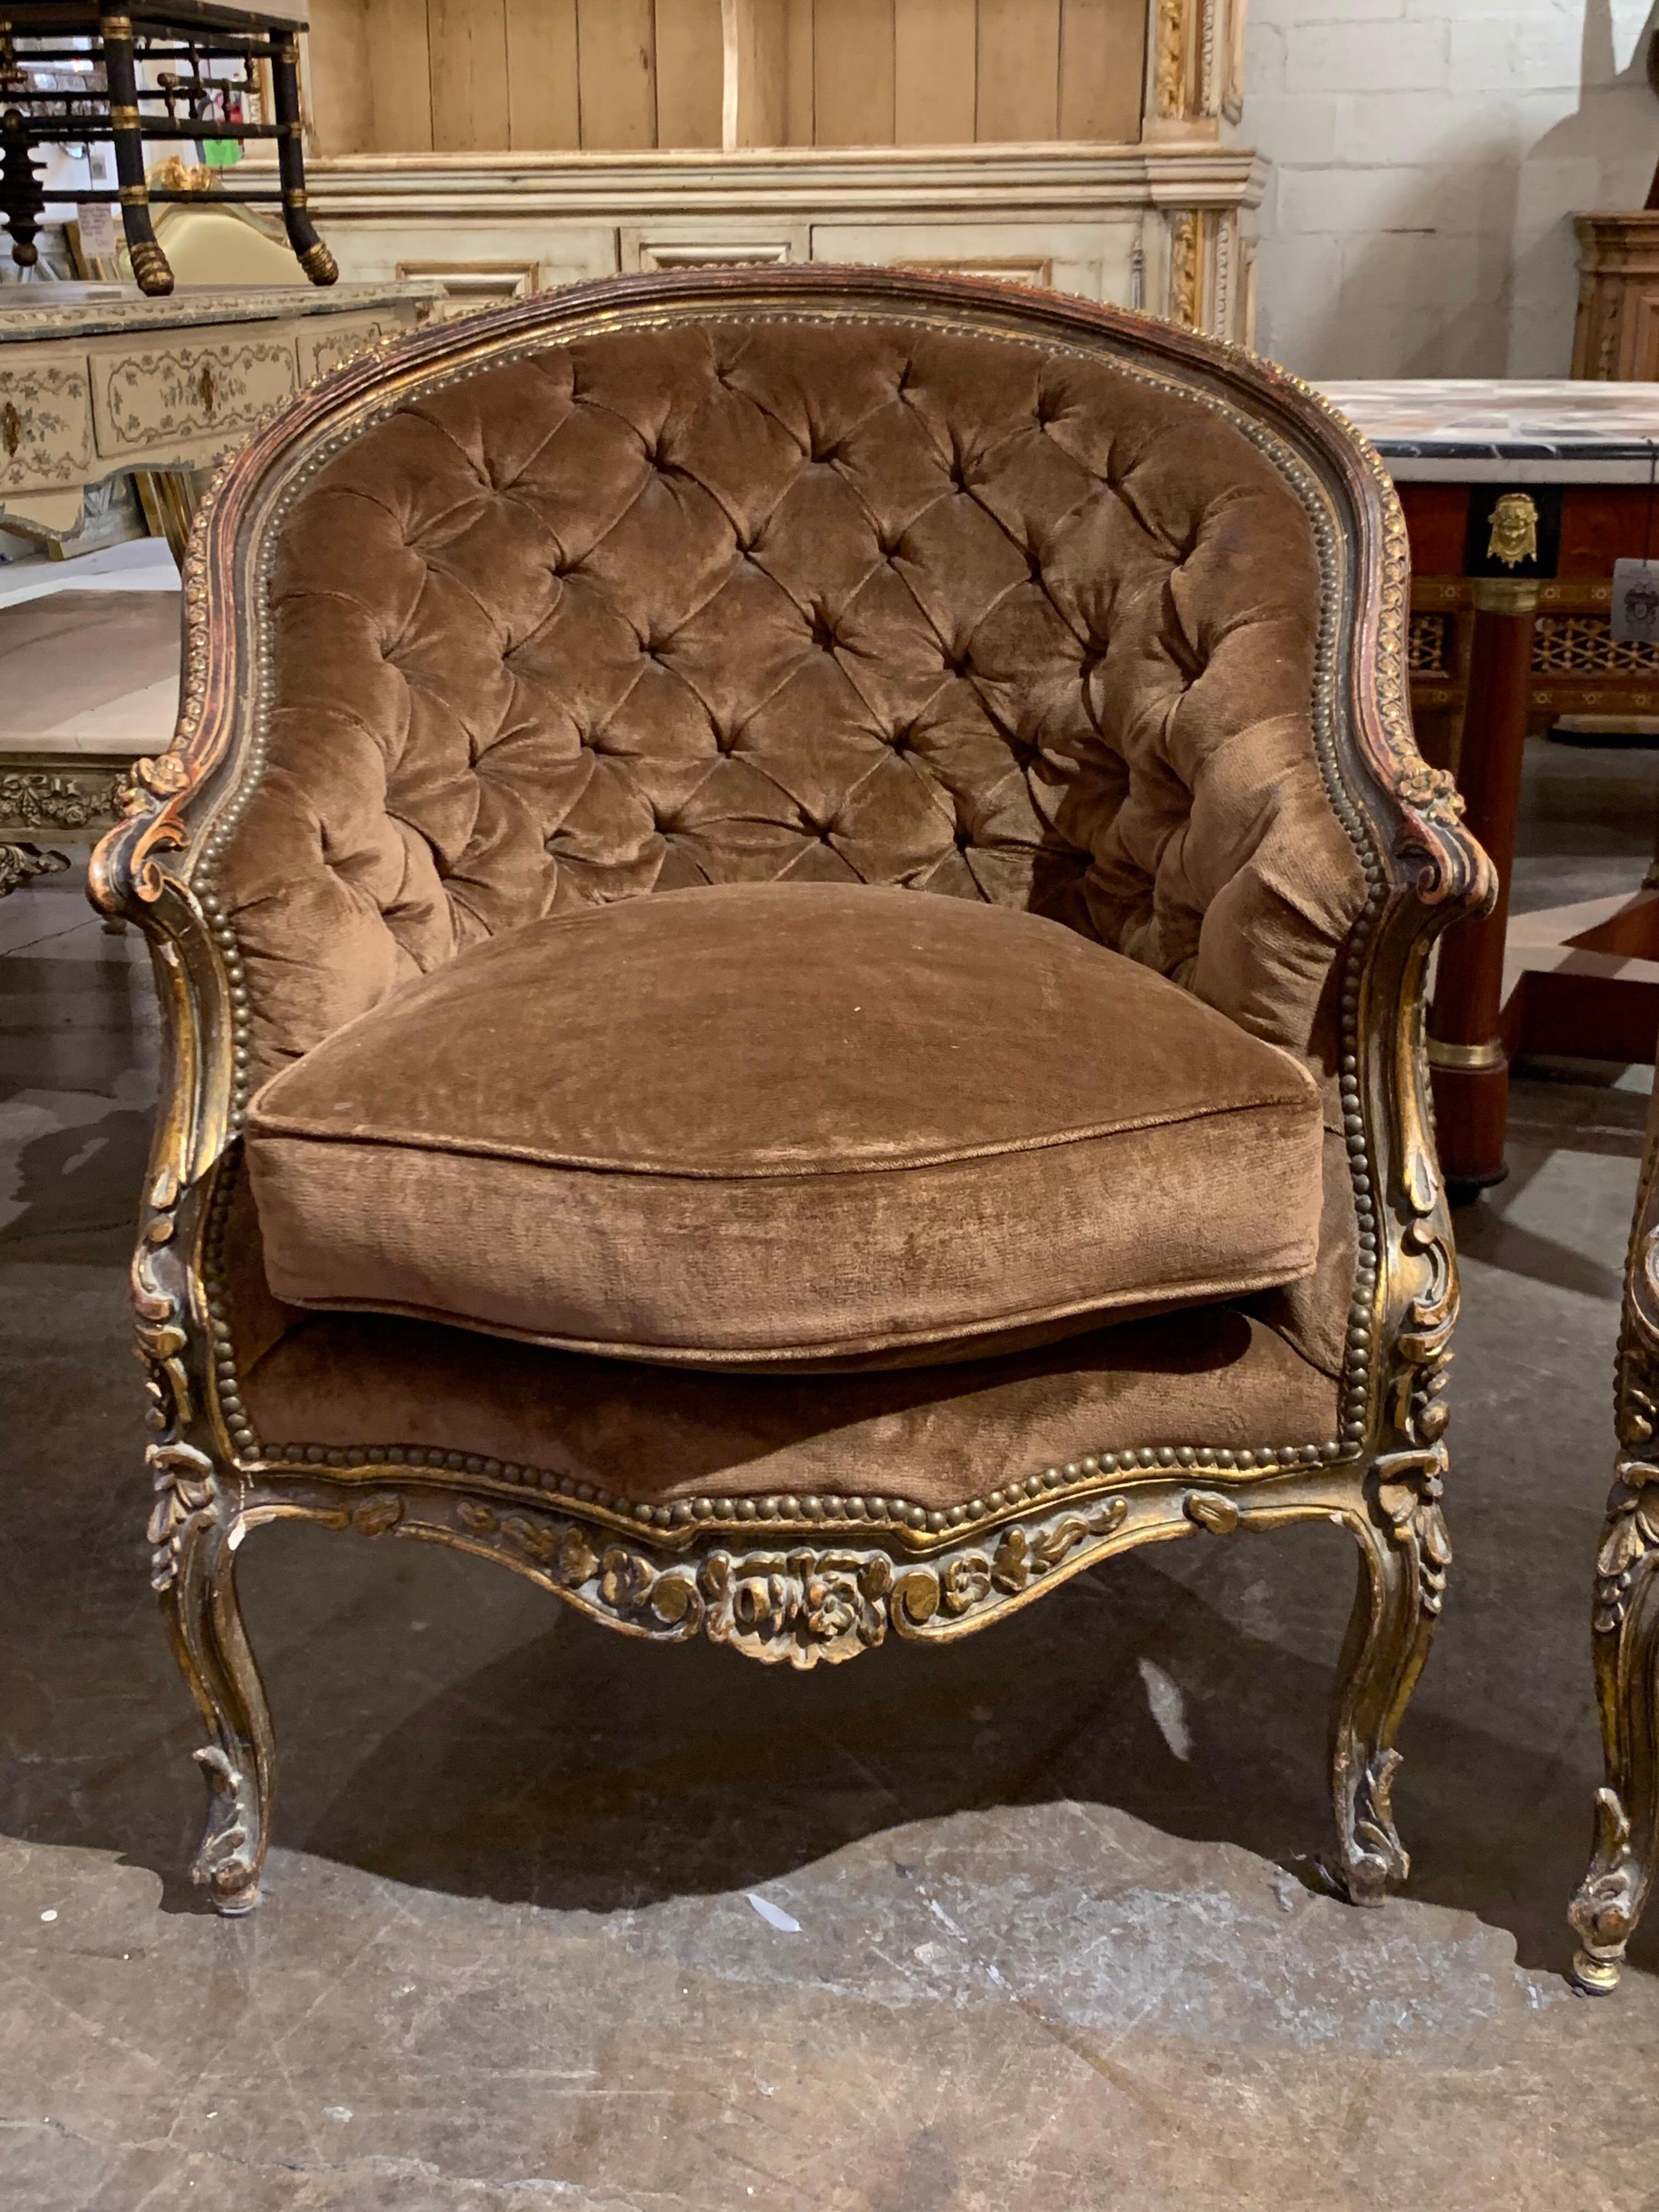 Incredible pair of French Louis XV style carved and gilded bergères upholstered in a brown velour fabric. Beautiful carvings on these! Super elegant and comfortable as well!